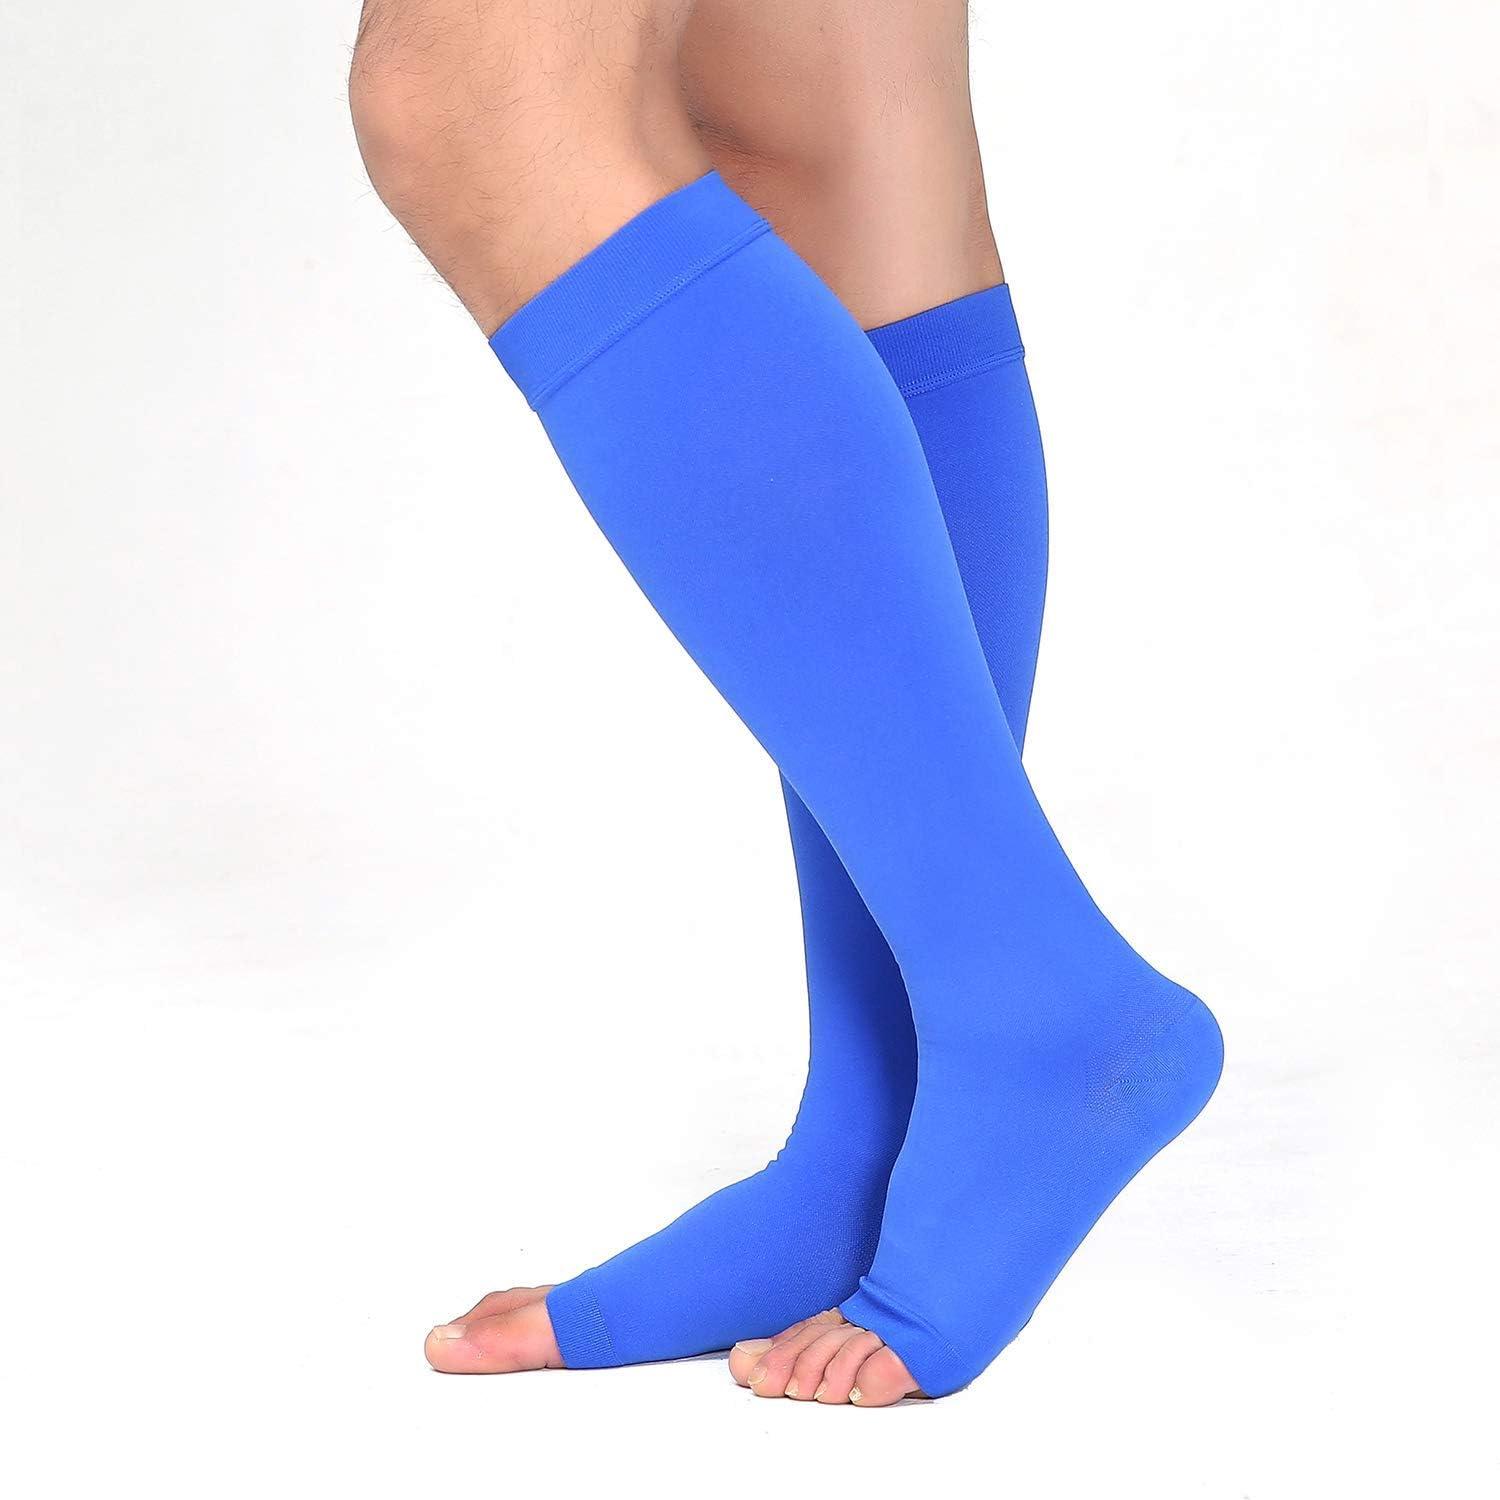 TOFLY Medical Compression Stockings 20-30 mmHg Knee High Compression Socks  M 20-30mmhg Open-toe Blue